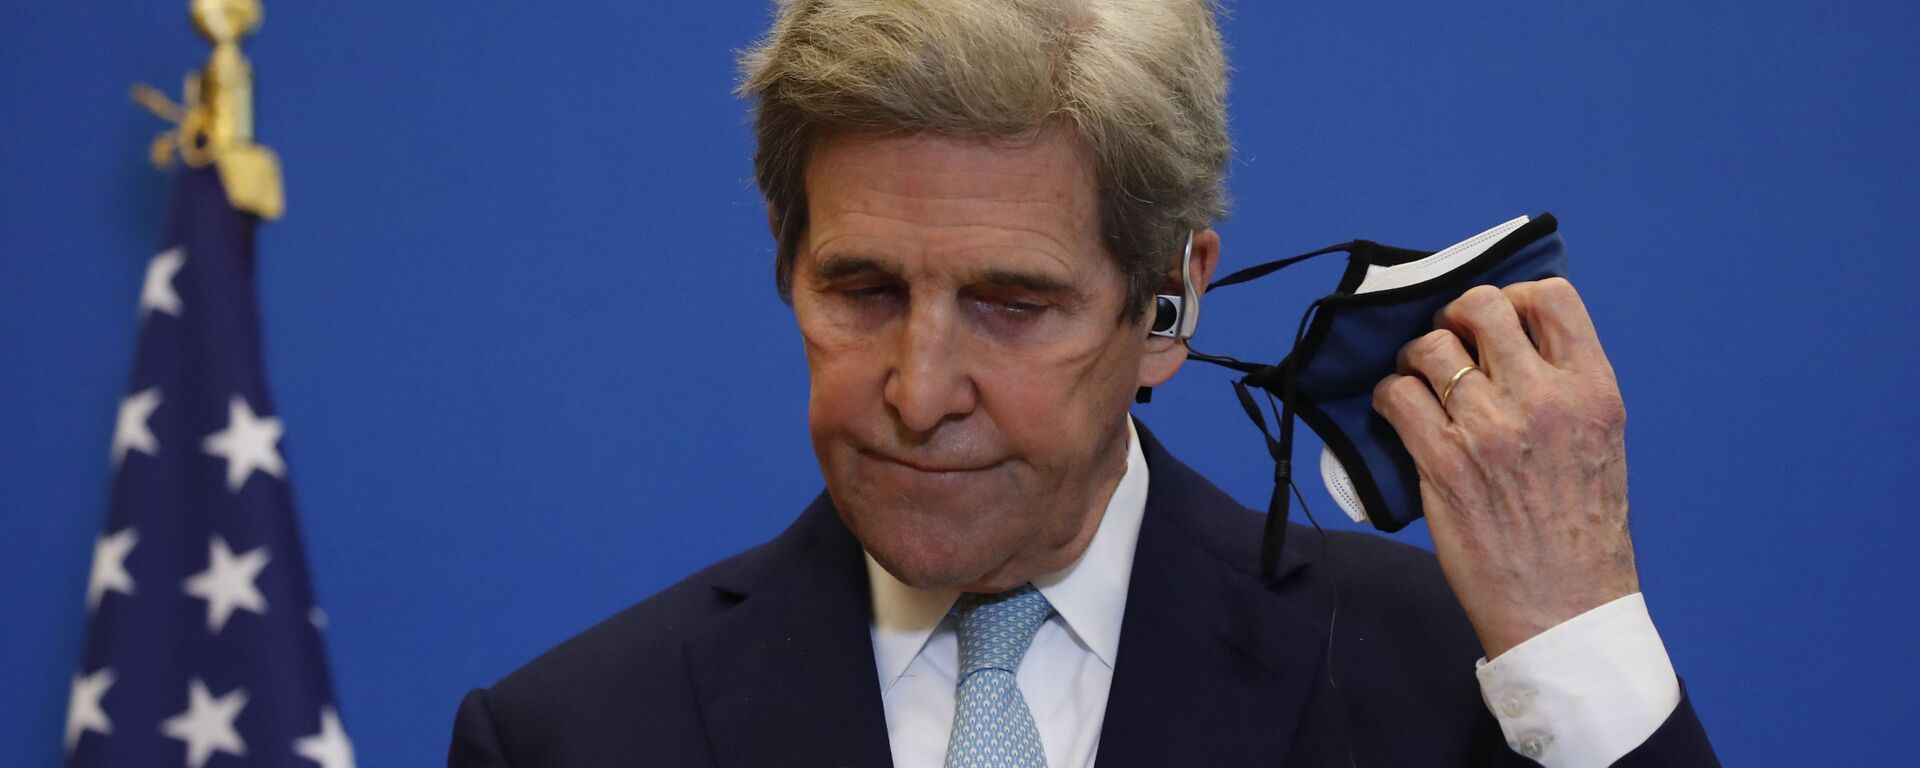 United States Special Presidential Envoy for Climate John Kerry removes his mask during a joint press conference with French Economy and Finance minister Bruno Le Maire, Wednesday, March 10, 2021 in Paris - Sputnik International, 1920, 08.08.2021